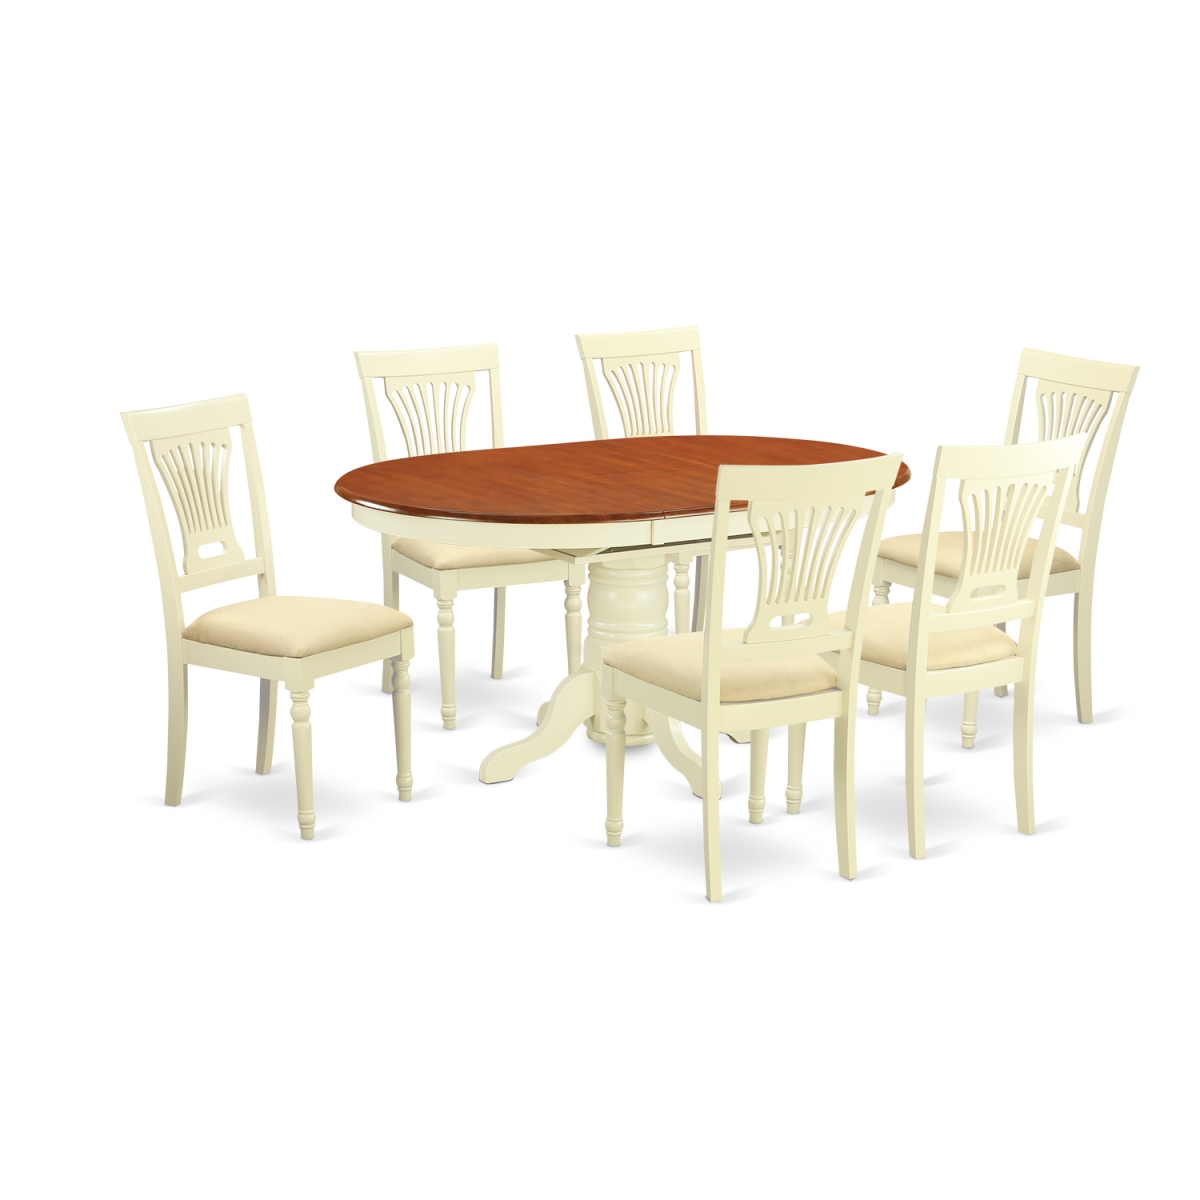 Picture of East West Furniture AVPL7-WHI-C Microfiber Dinette Table Set with 6 Table & 6 Chairs, Buttermilk & Cherry - 7 Piece